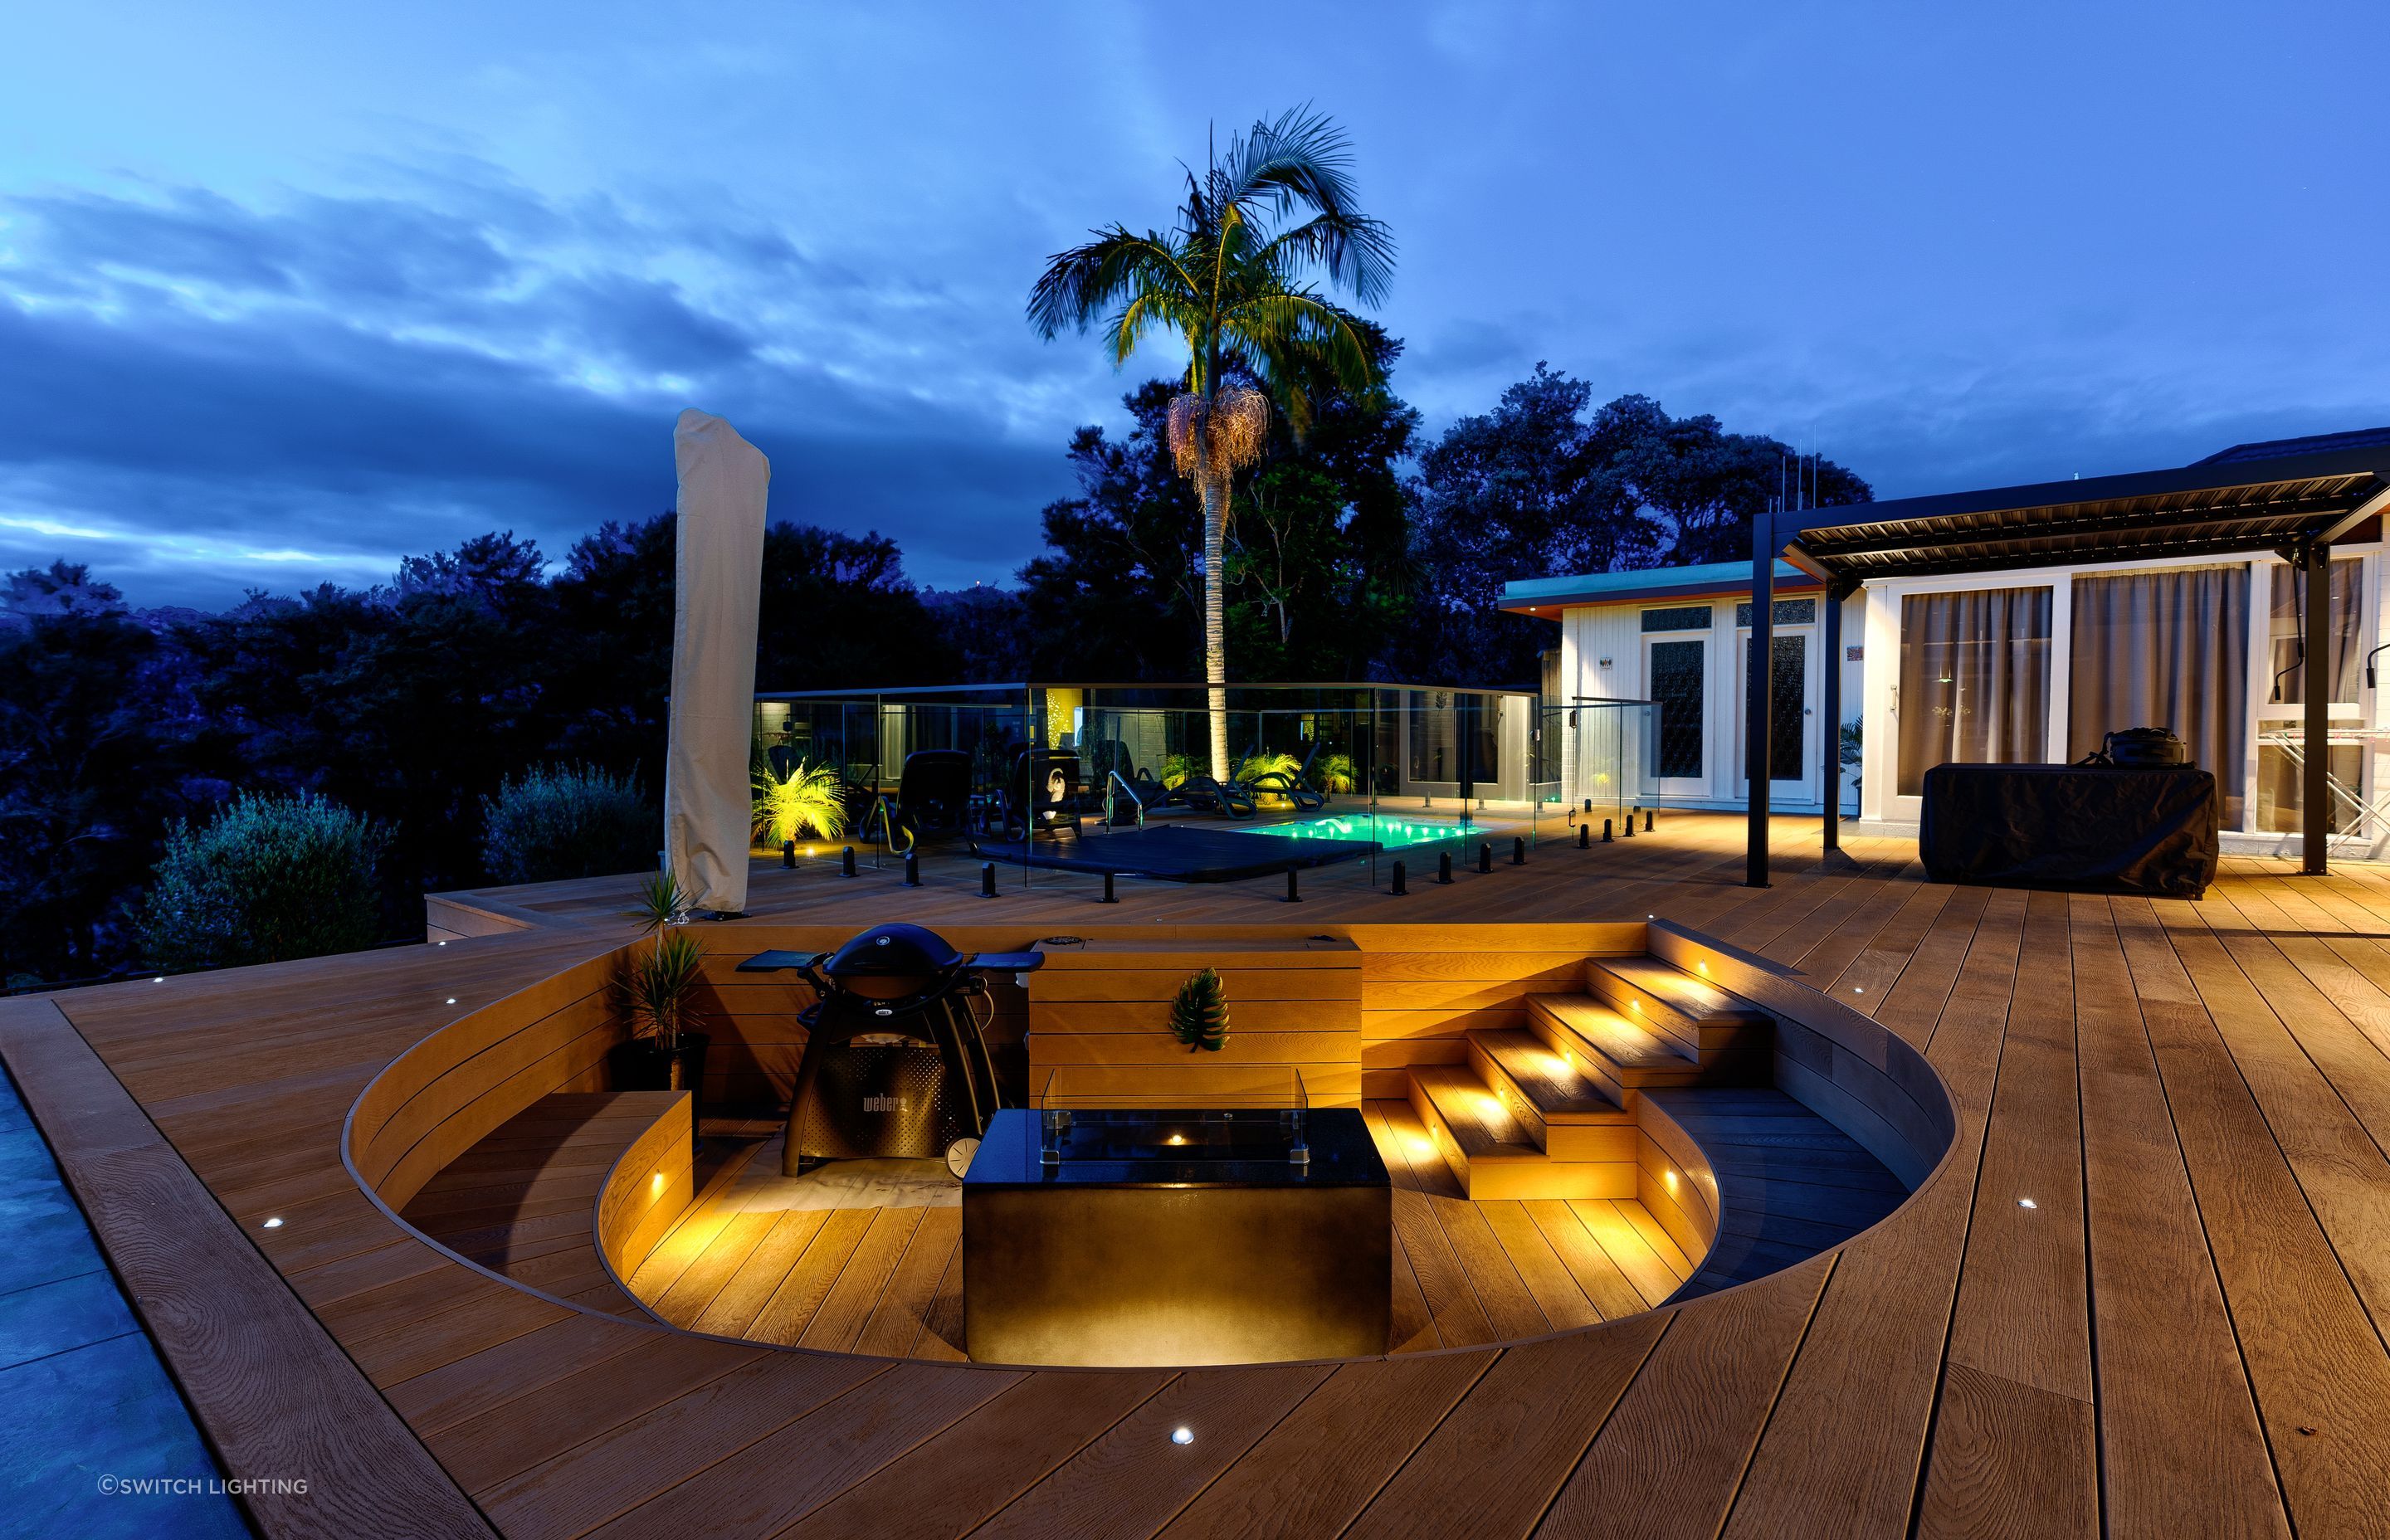 Switch Lighting Mini-LIGHTZ create an inviting atmosphere in this outdoor entertainment area.